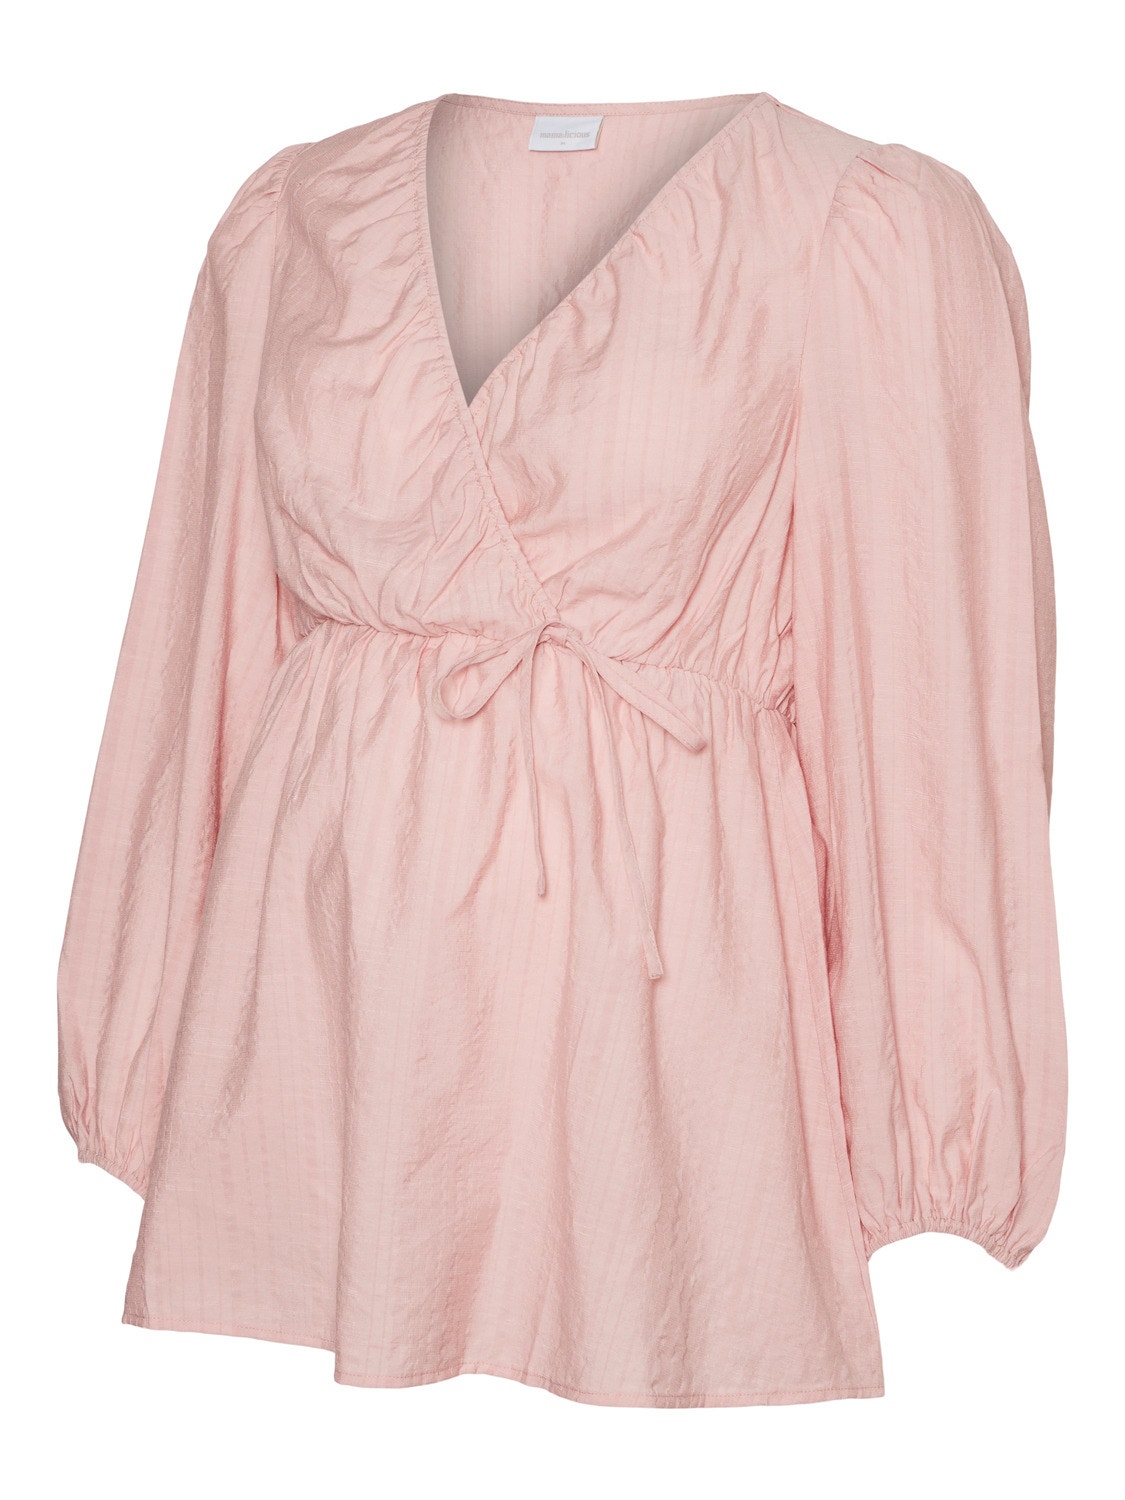 MAMA.LICIOUS V-Neck Elasticated cuffs Balloon sleeves Tunic -Misty Rose - 20018064